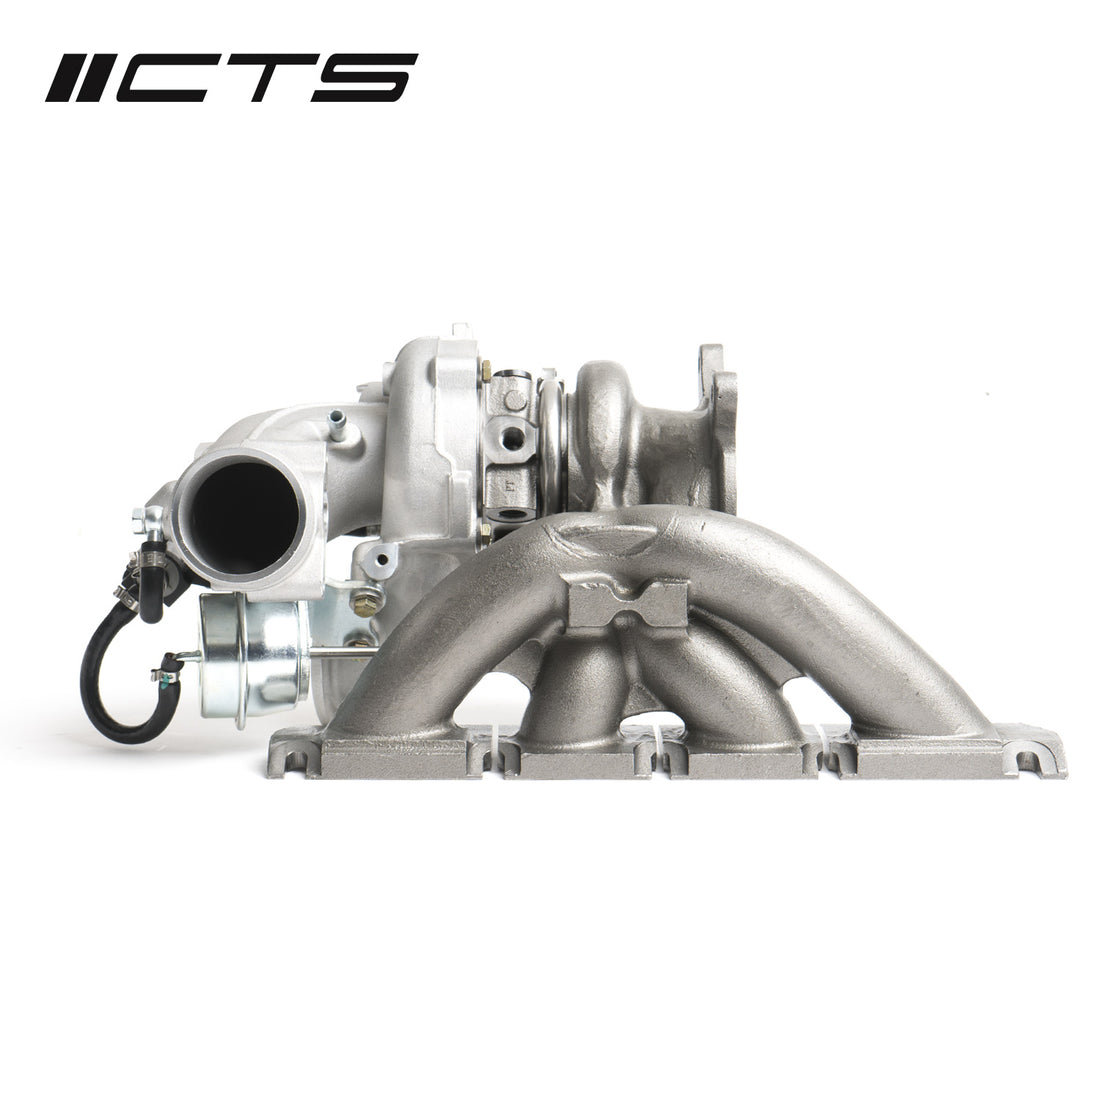 CTS Turbo K04-X Hybrid Turbocharger for FSI and TSI Gen1 Engines (EA113 and EA888.1) CTS Turbo TR-1050X